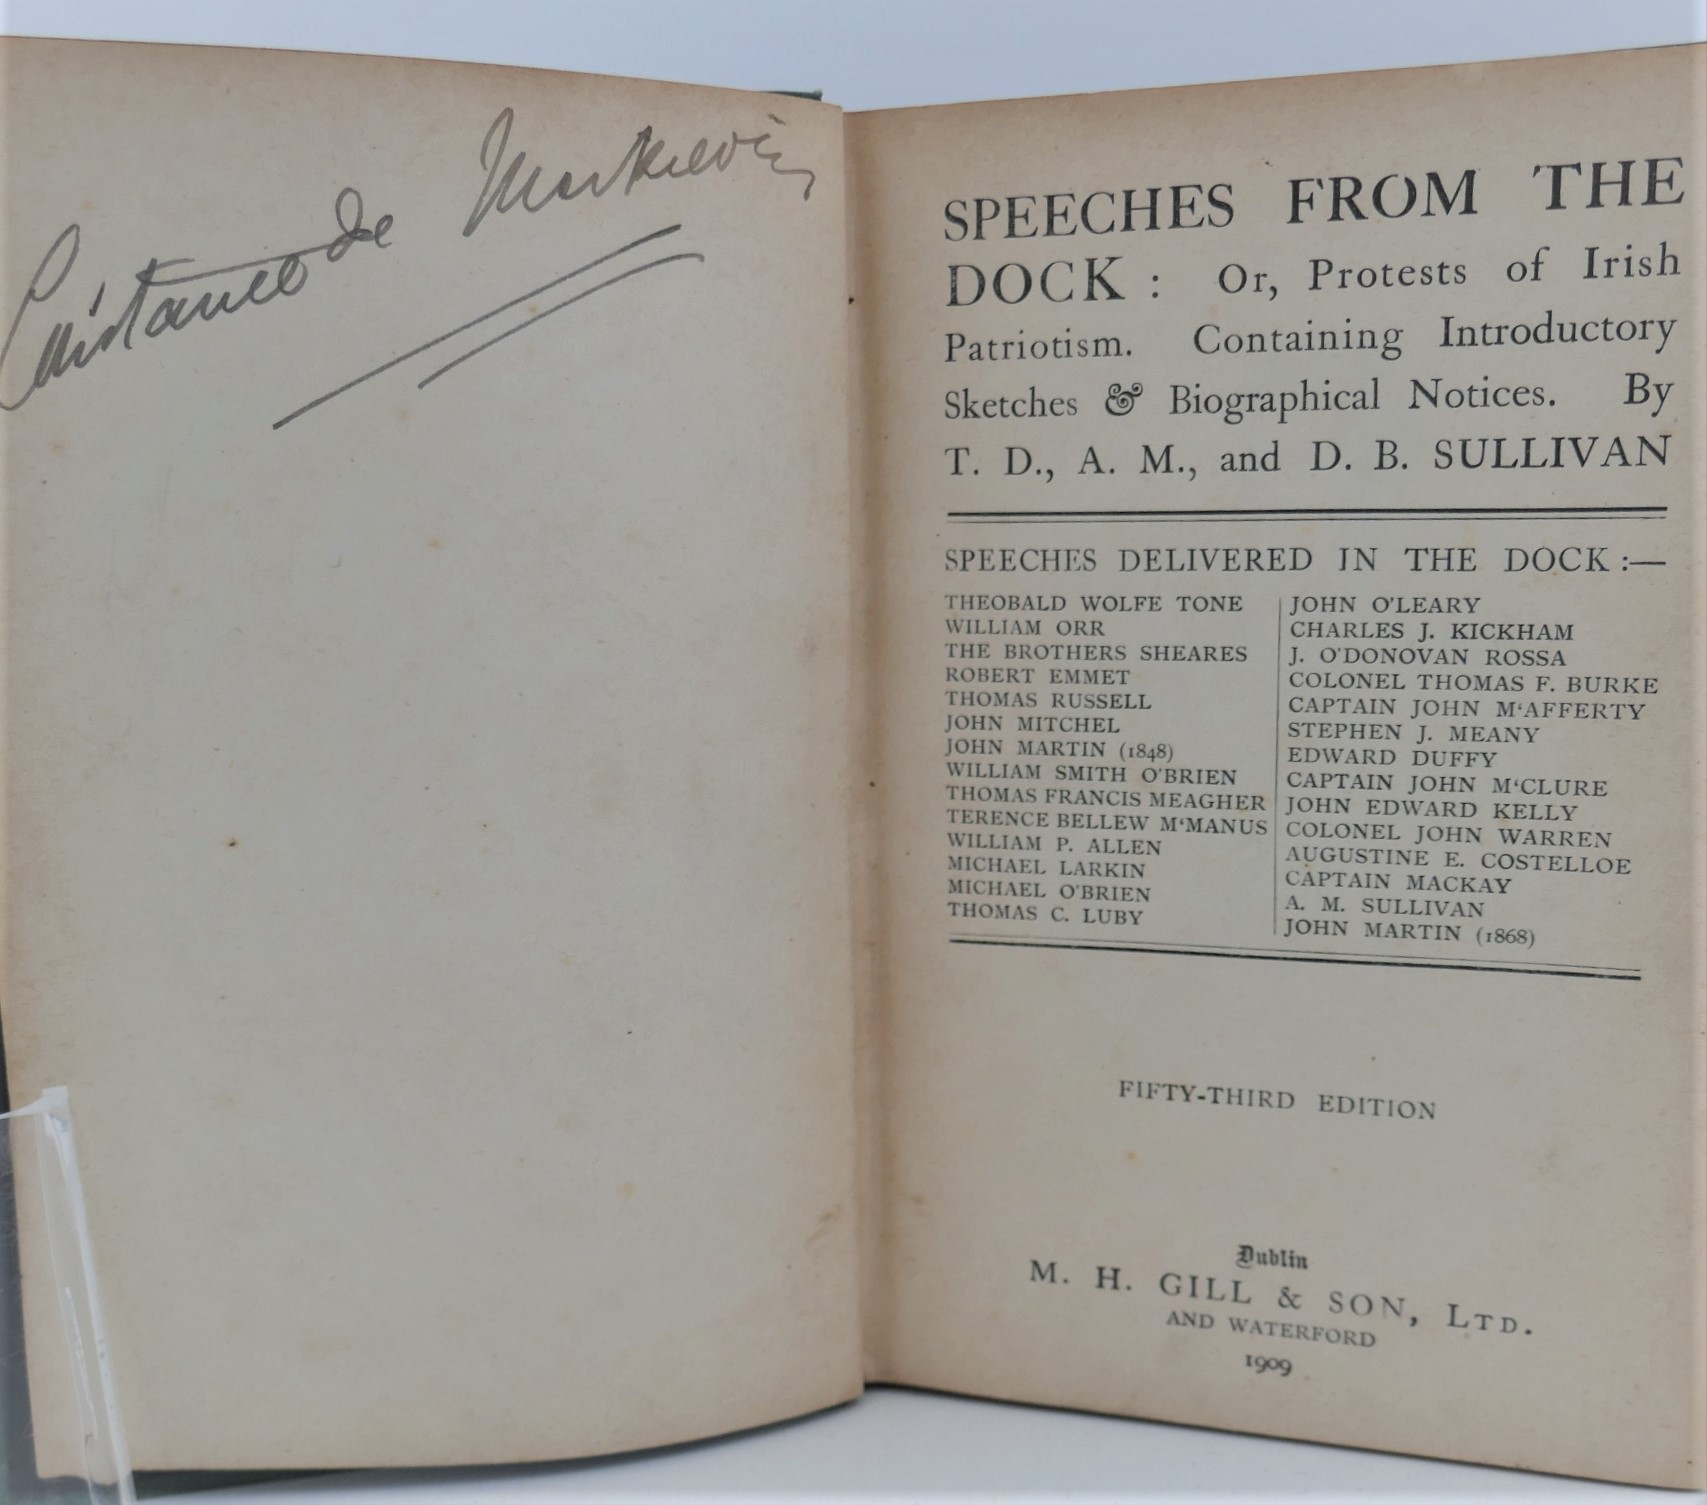 Speeches from the Dock. Signed by Countess Markievicz (1909) - Ulysses ...